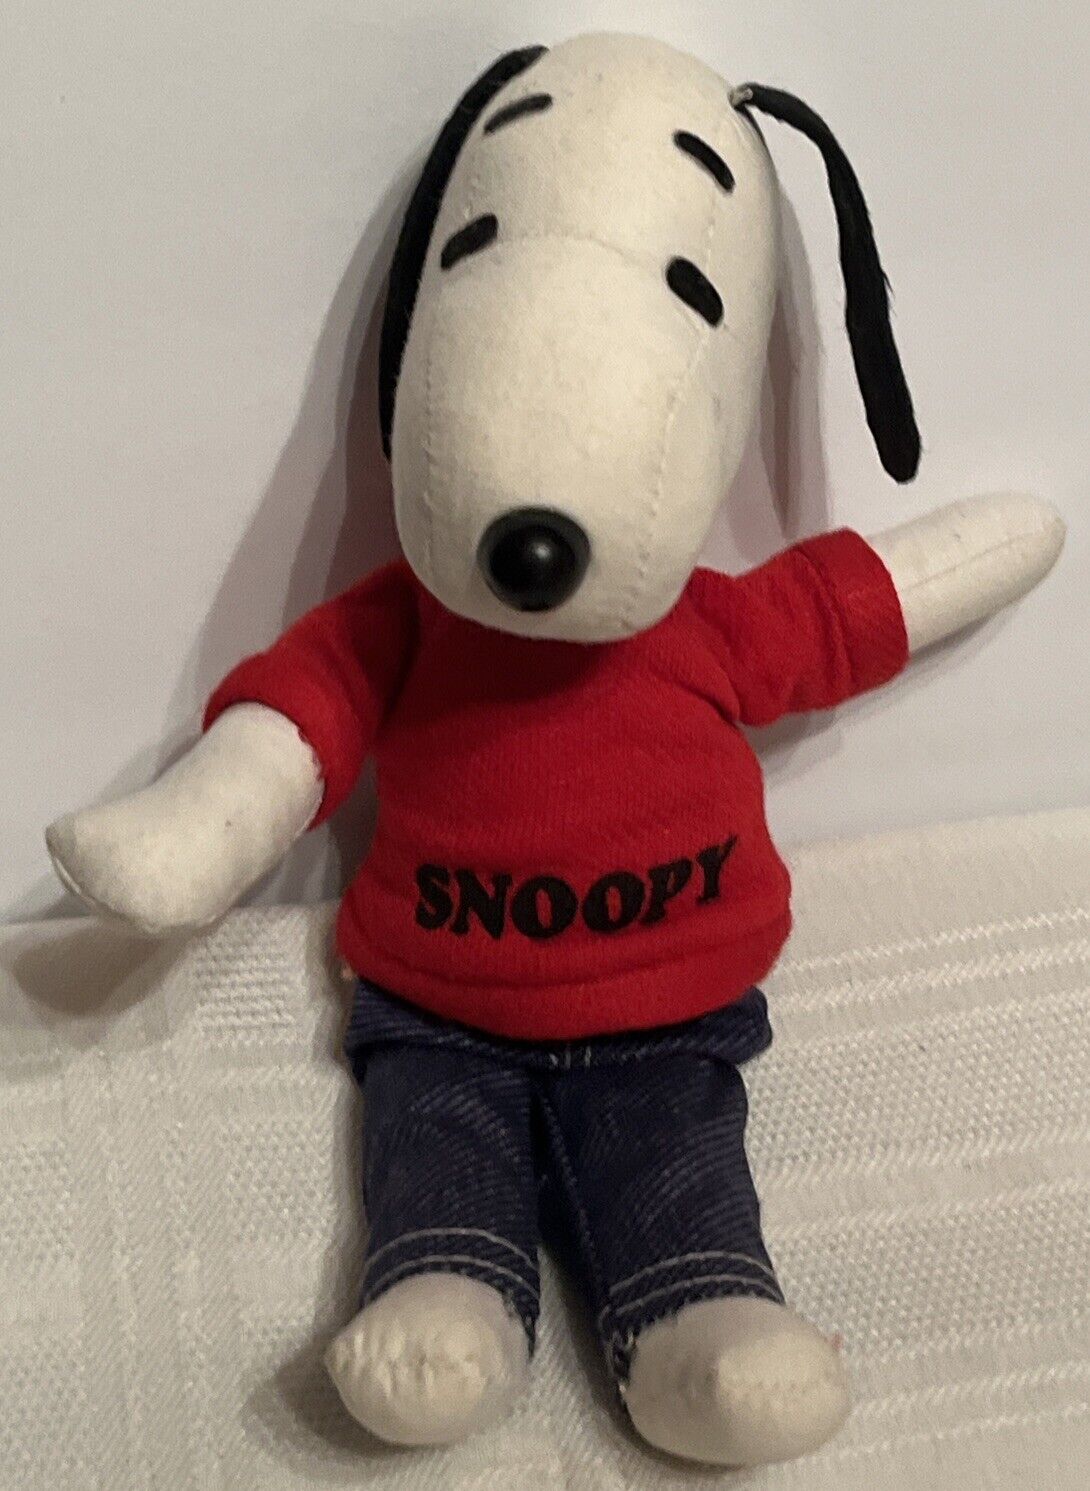 Vintage 1968 Ideal SNOOPY 8” Doll W/Jeans & Sweatshirt Determined Production